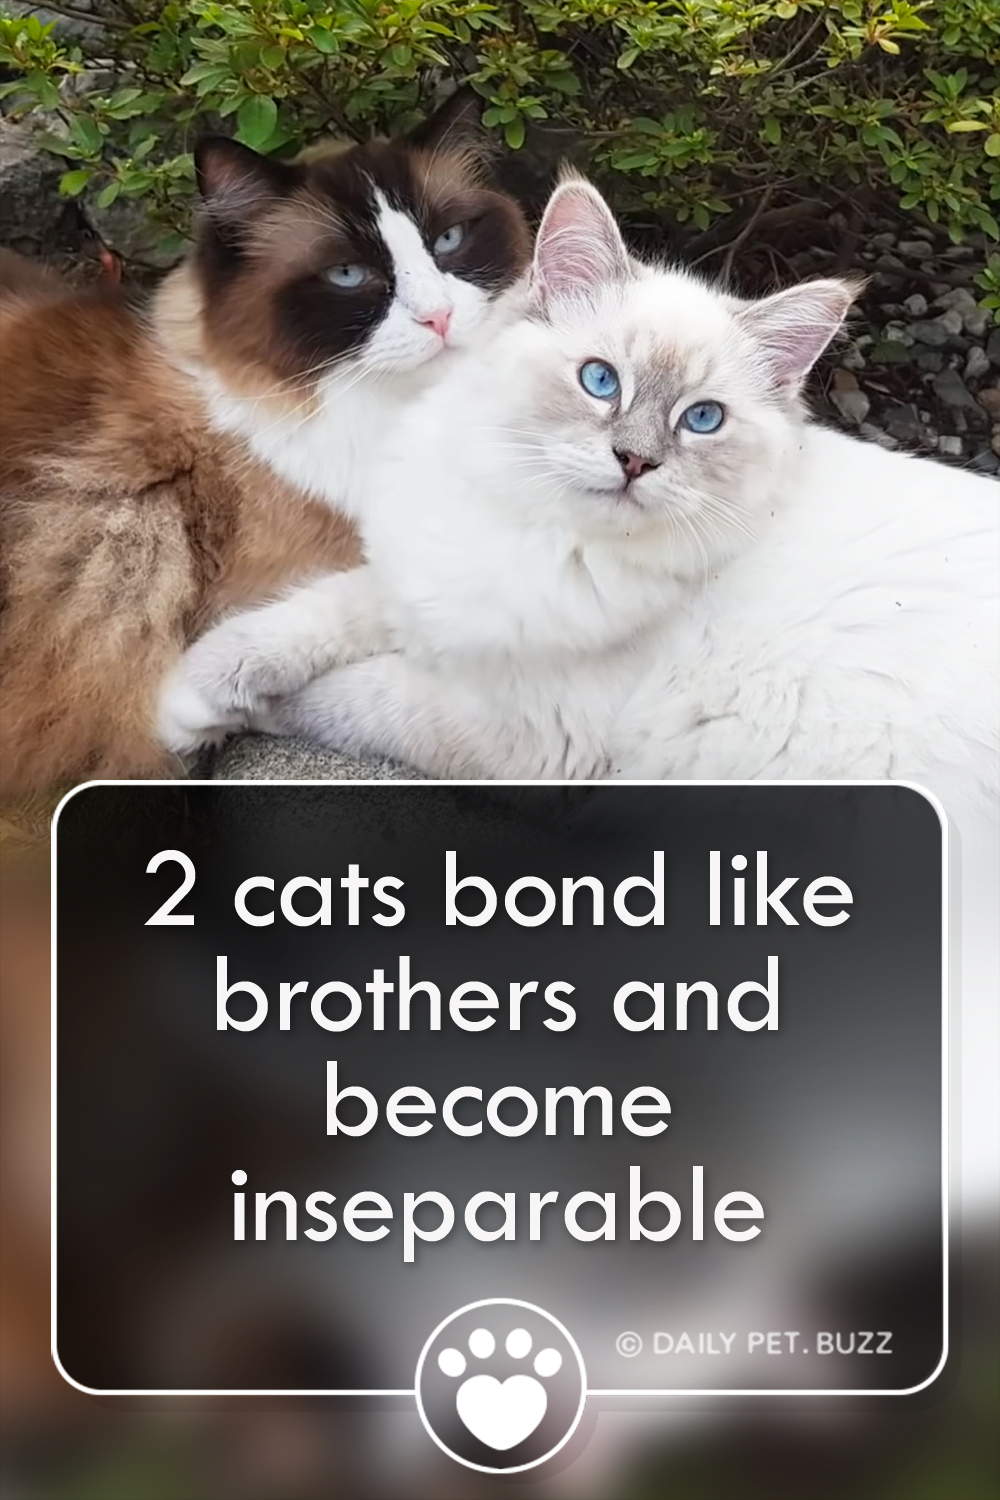 2 cats bond like brothers and become inseparable